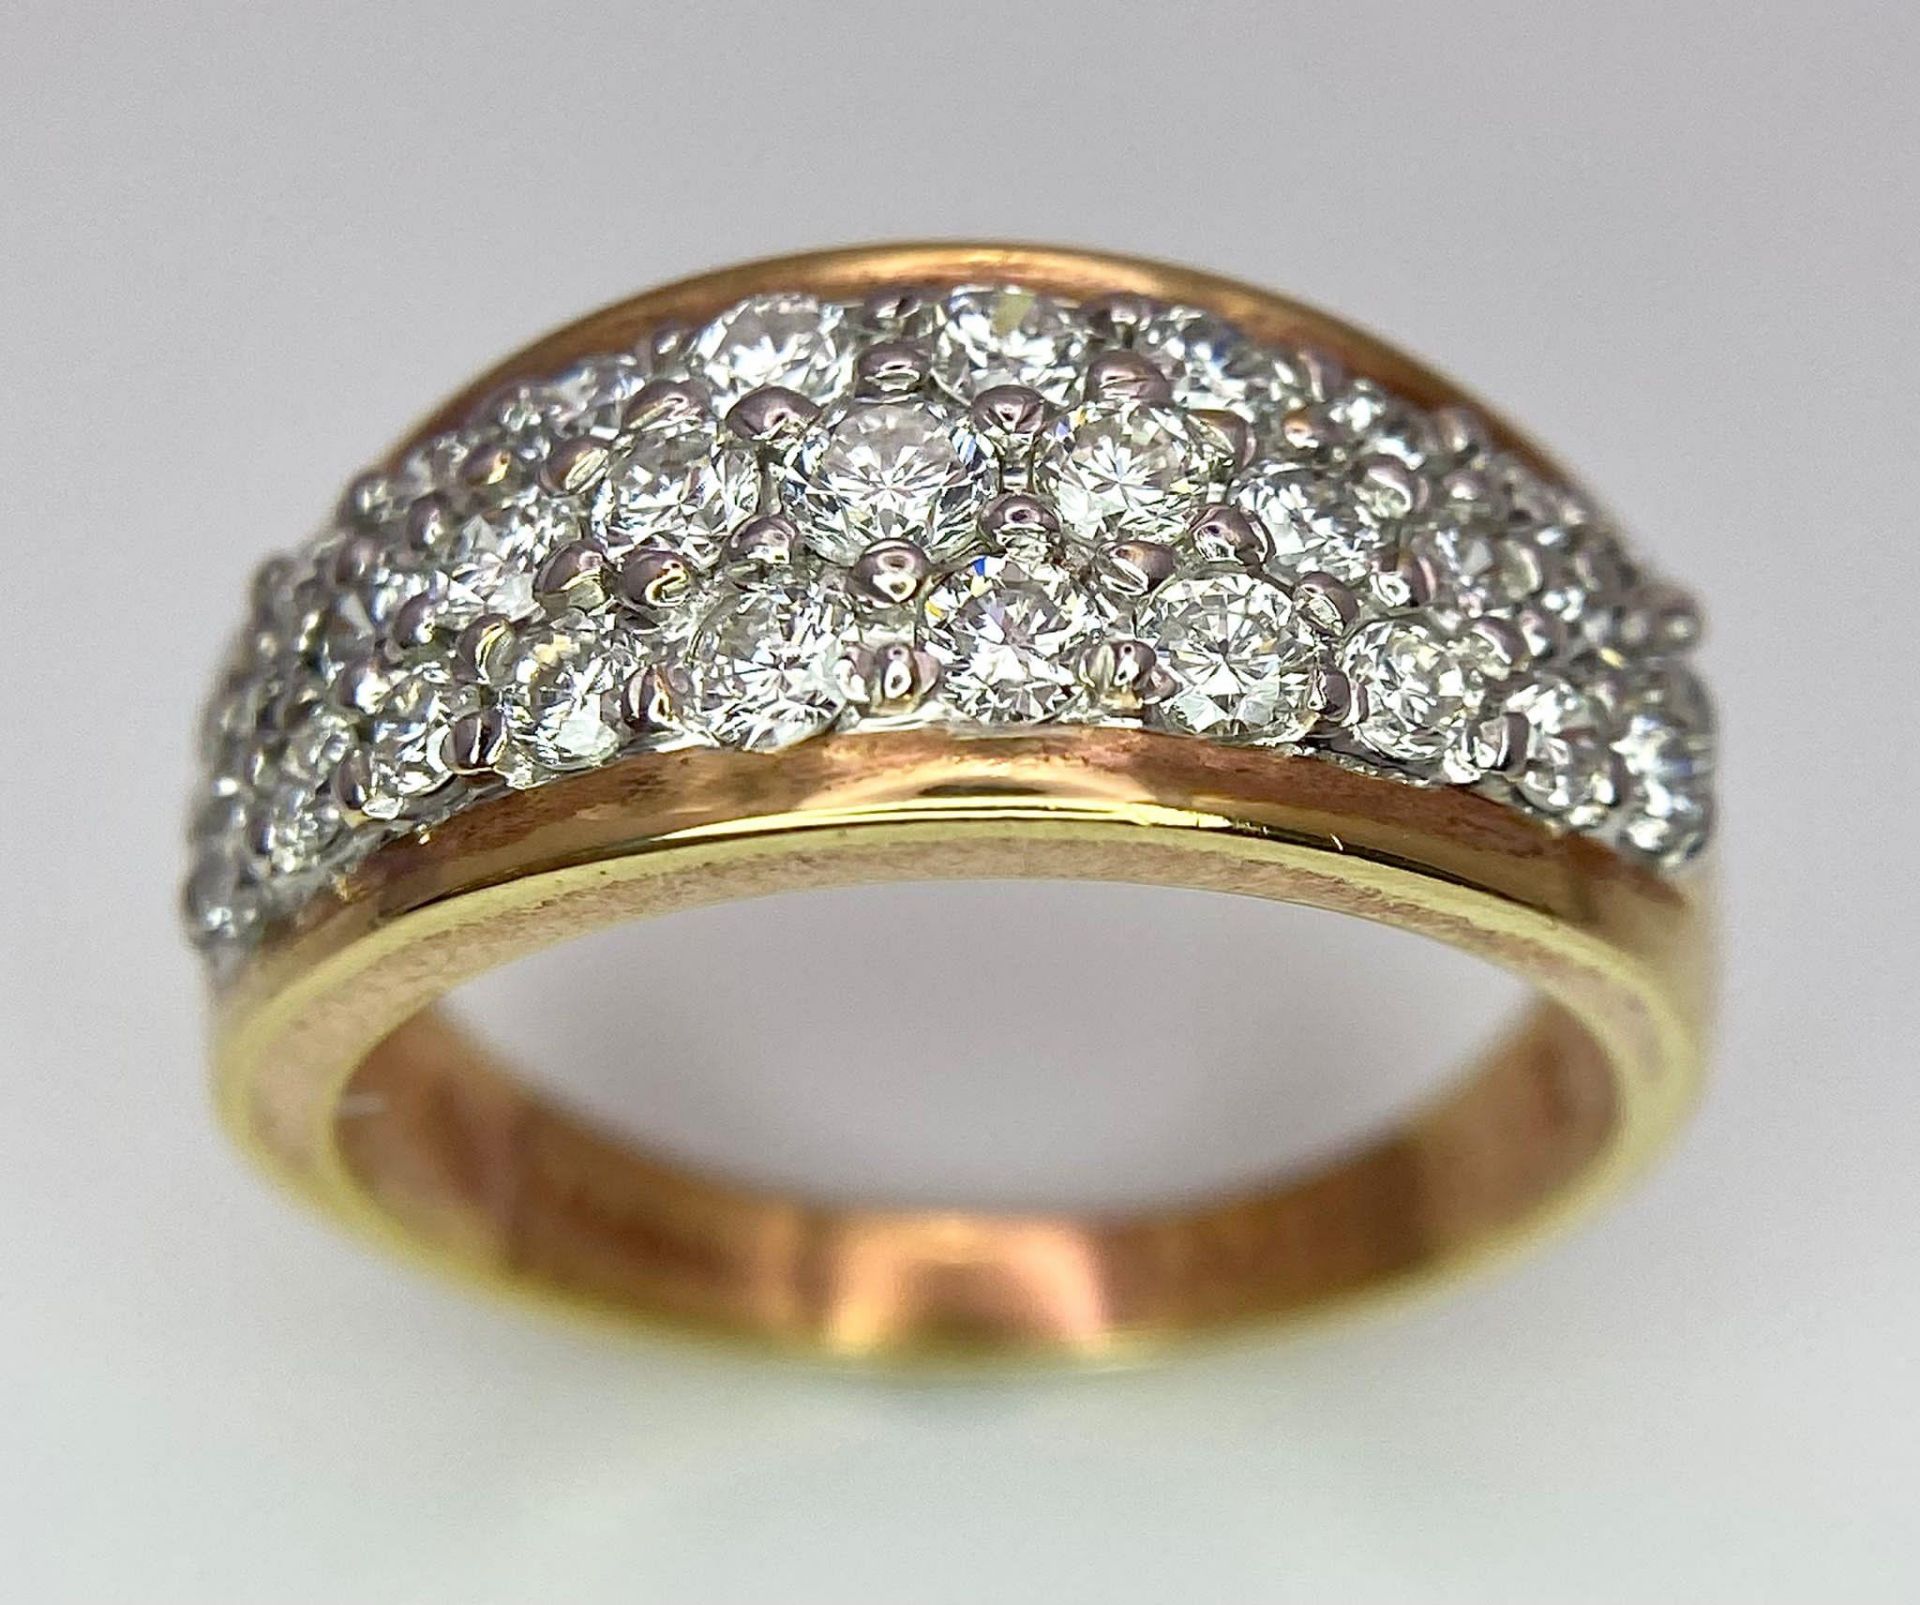 An 18K Yellow Gold Three-Row Cluster Ring. 1ctw. Size M. 5.5g total weight. - Image 8 of 15